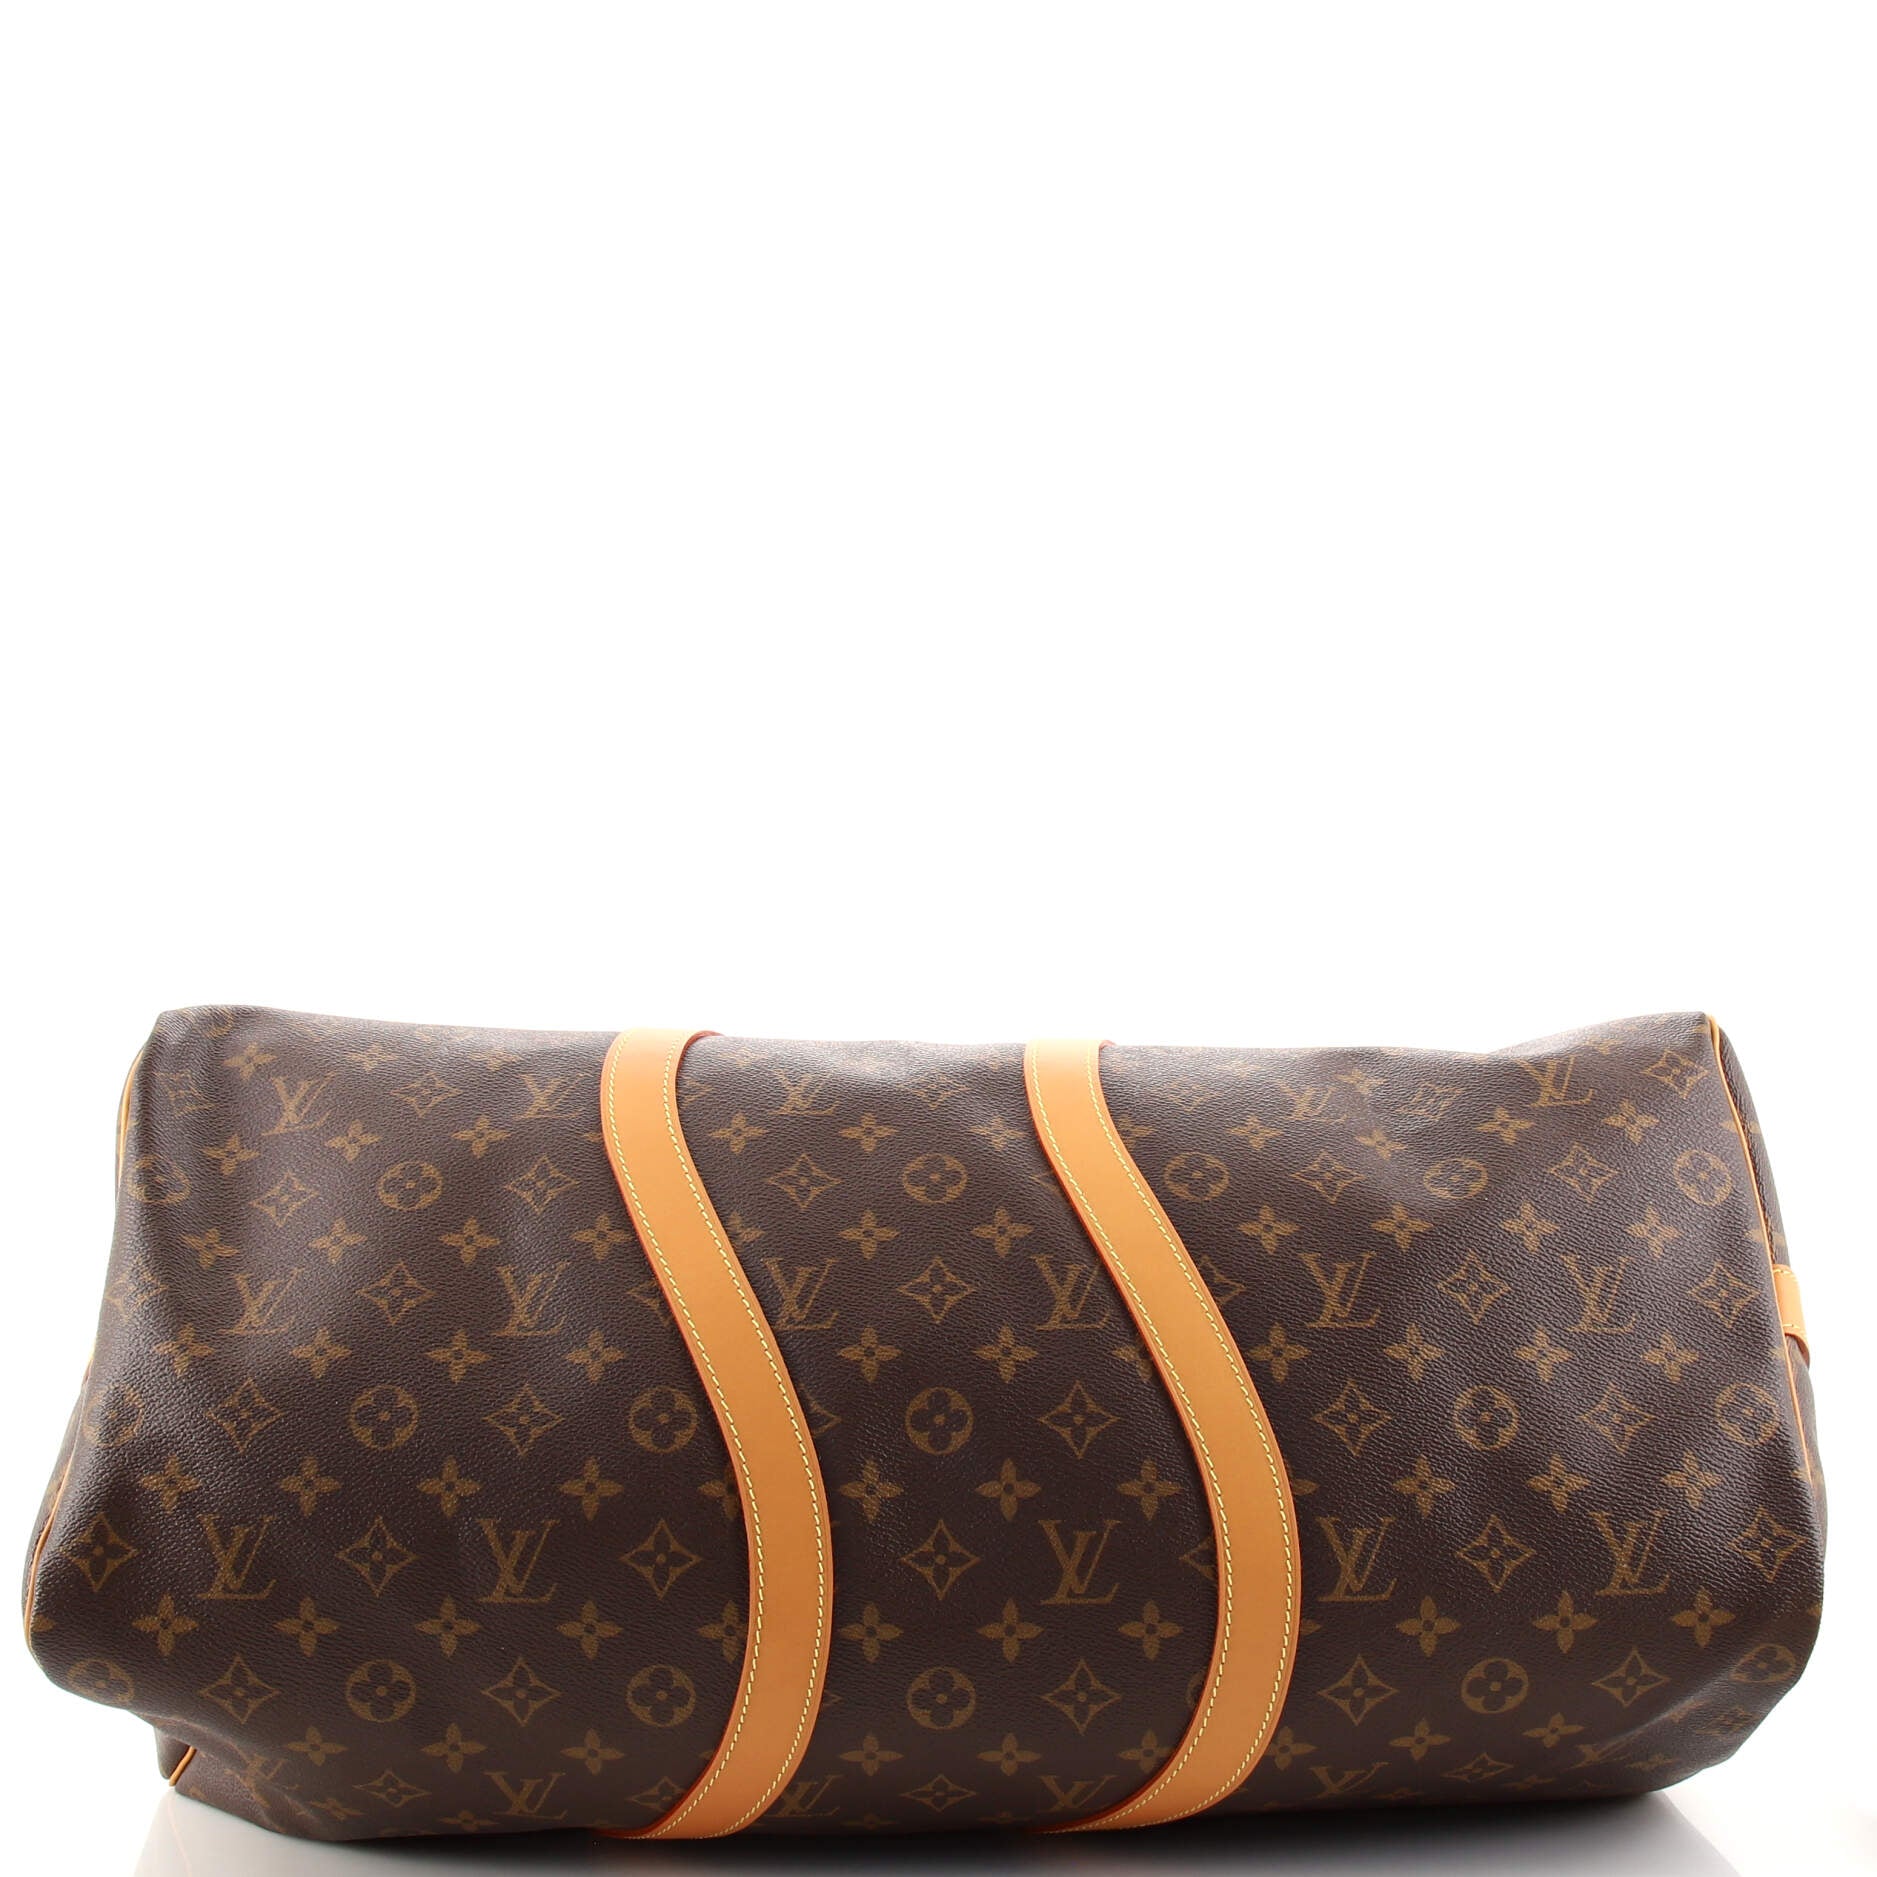 Louis Vuitton Keepall Bandouliere Wavy 50 Epi Colorblock in